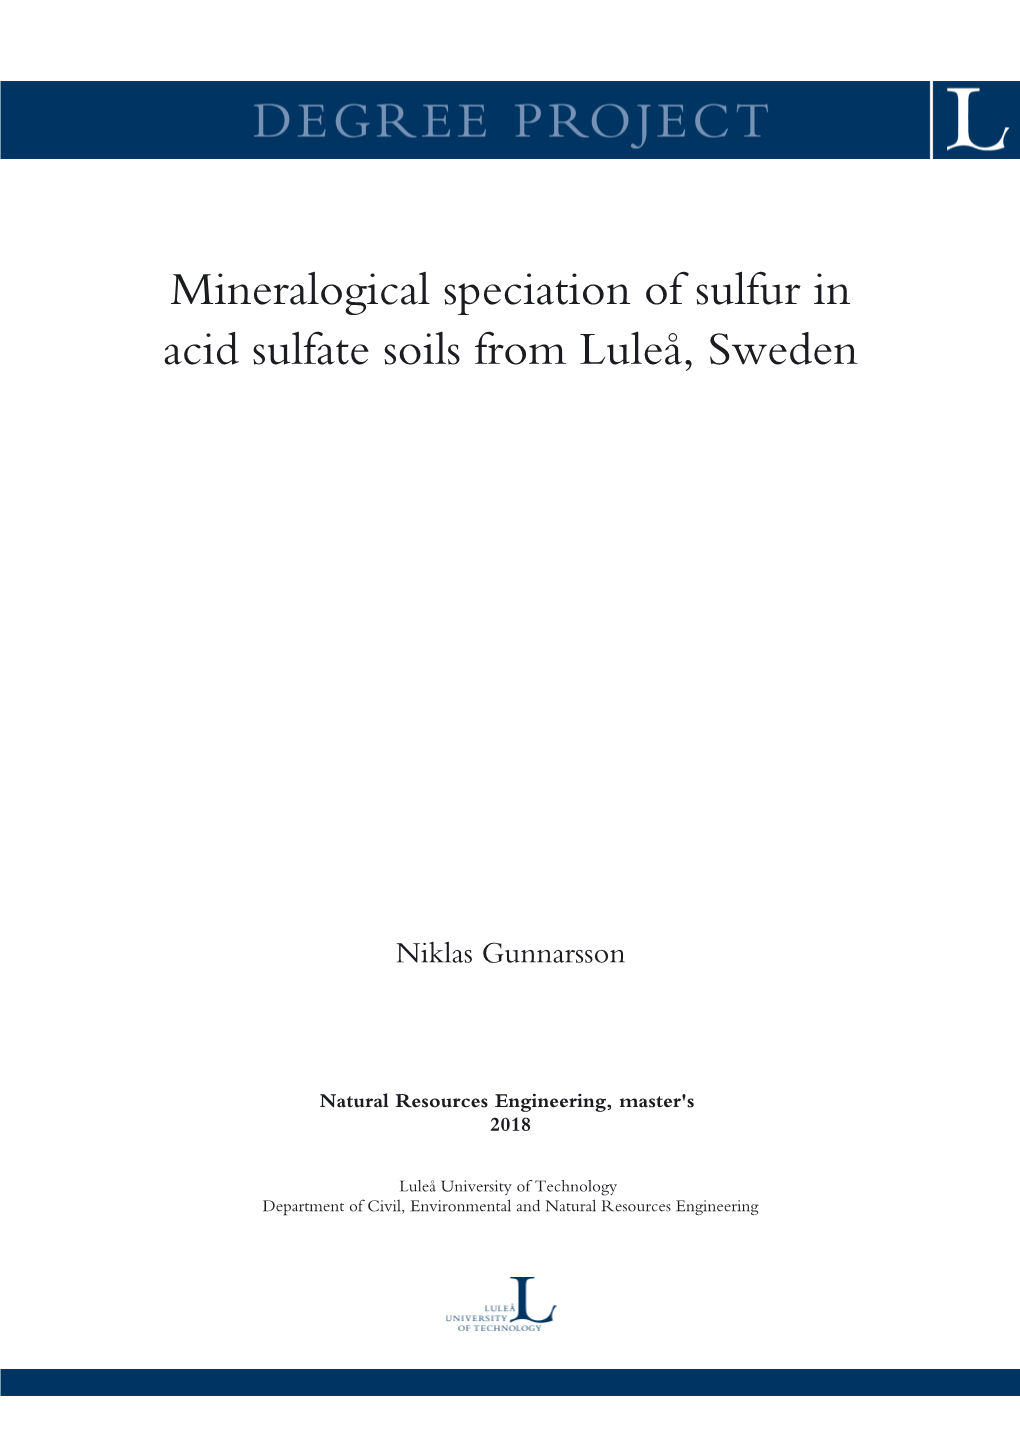 Mineralogical Speciation of Sulfur in Acid Sulfate Soils from Luleå, Sweden